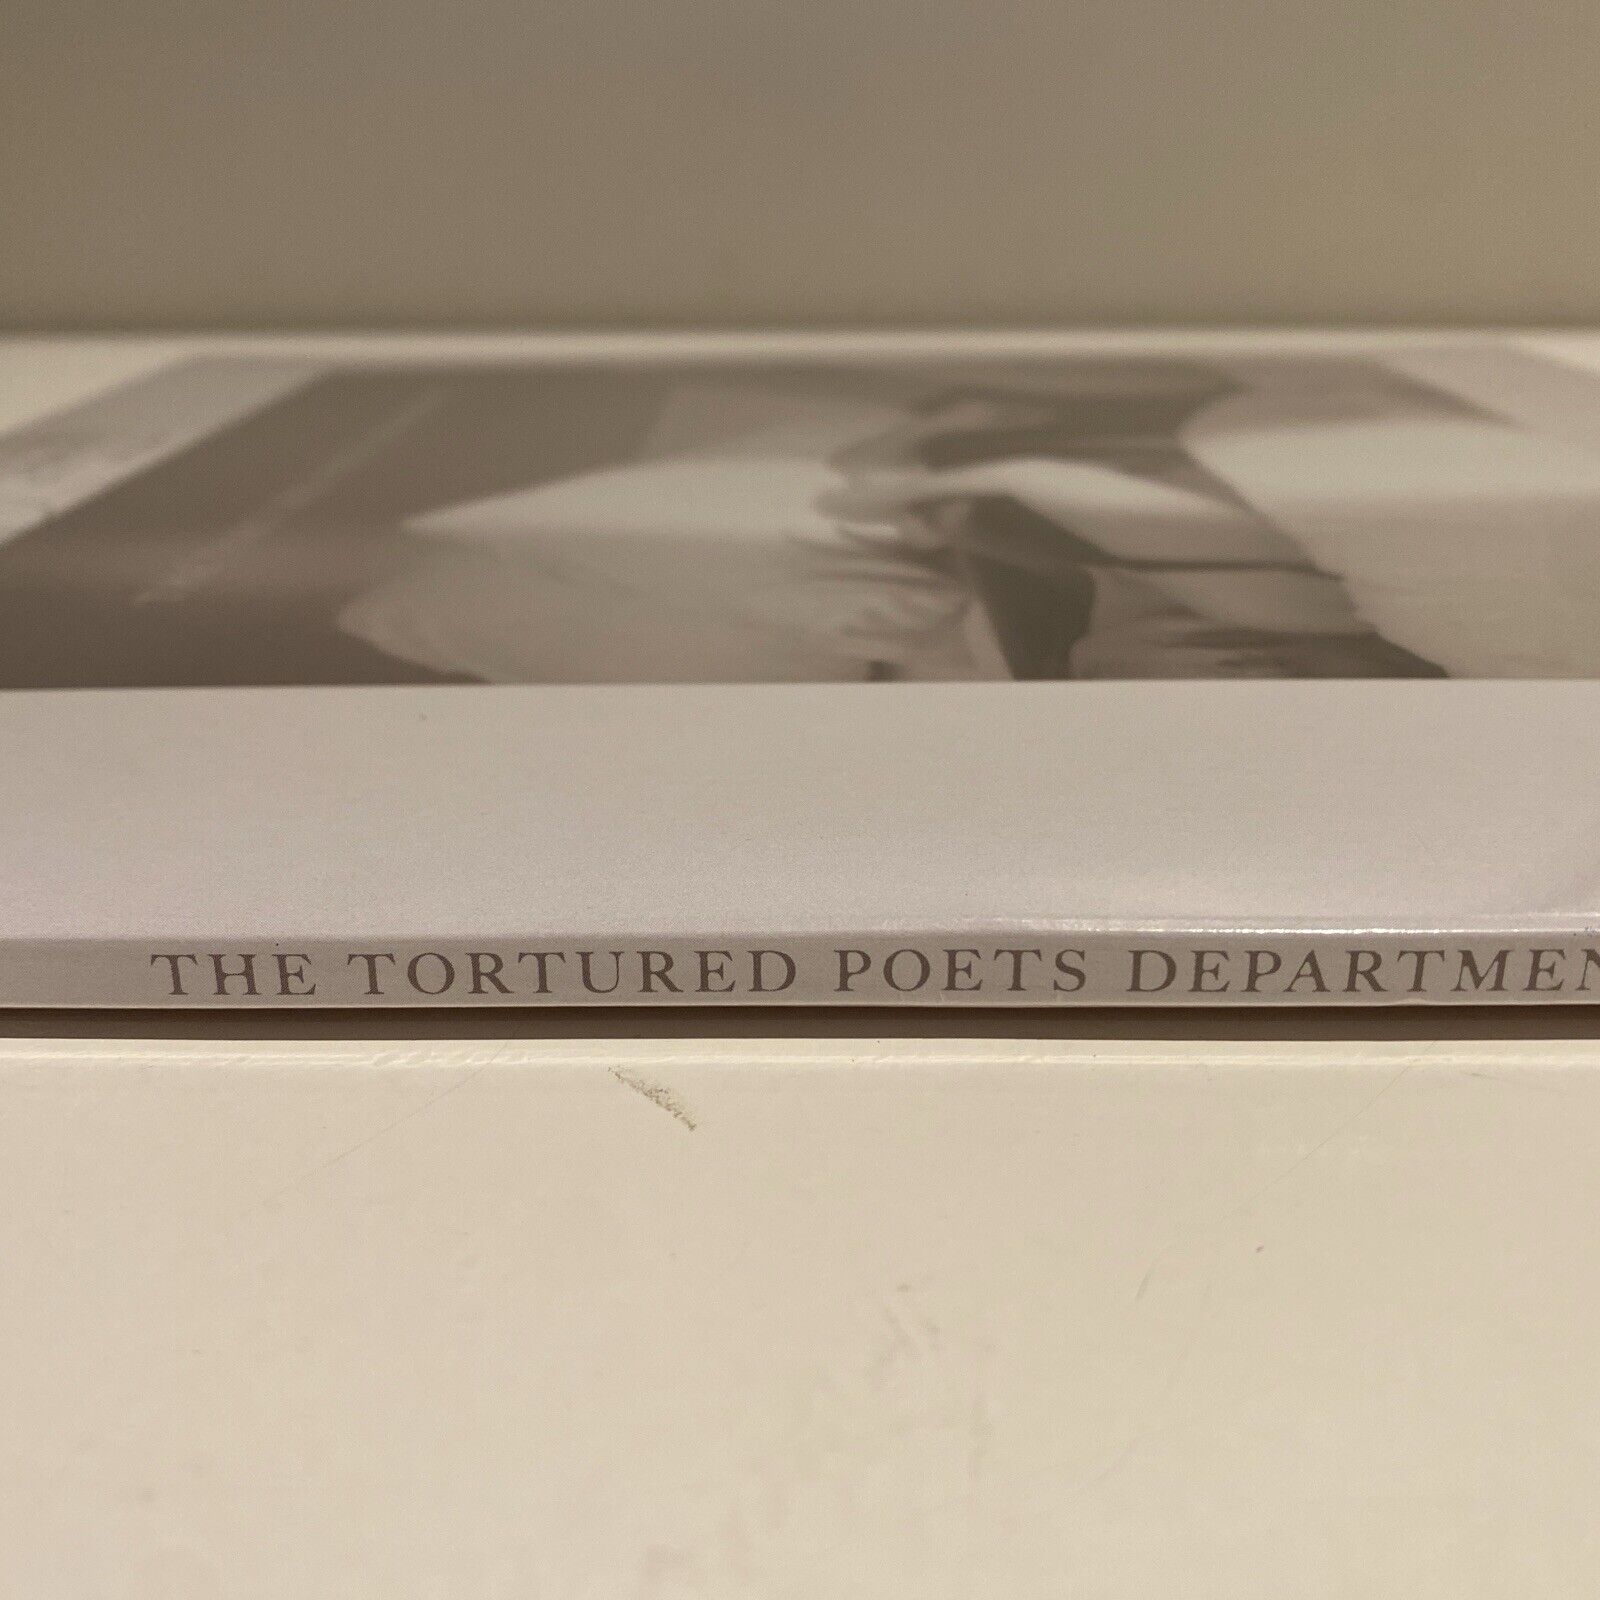 Taylor Swift Tortured Poets Department GHOST WHITE Vinyl Record LP. Brand New.